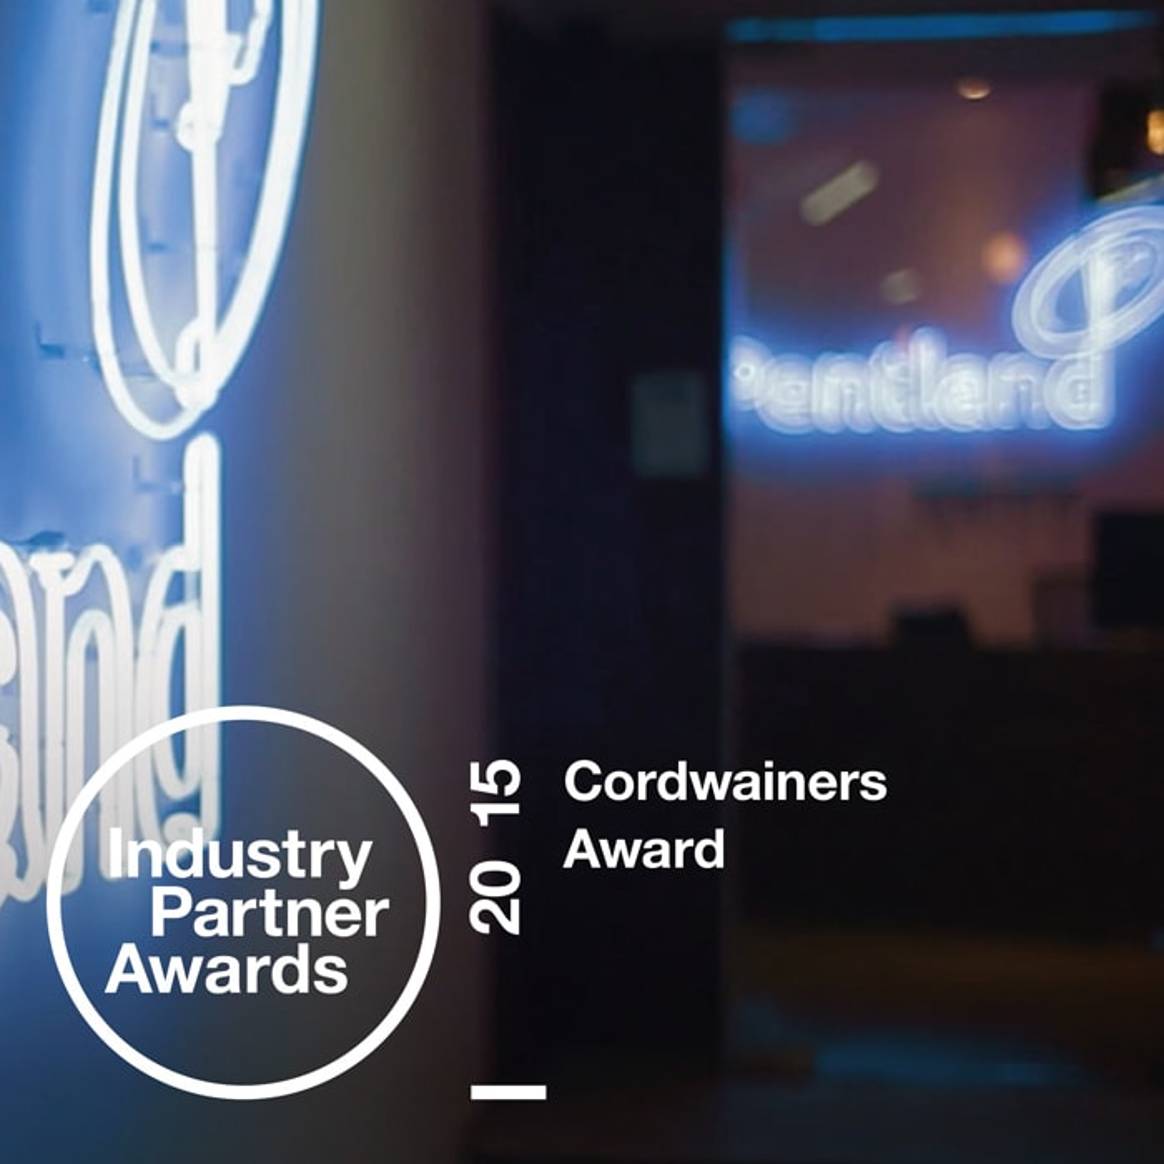 Pentland wins the first London College of Fashion Cordwainers Award